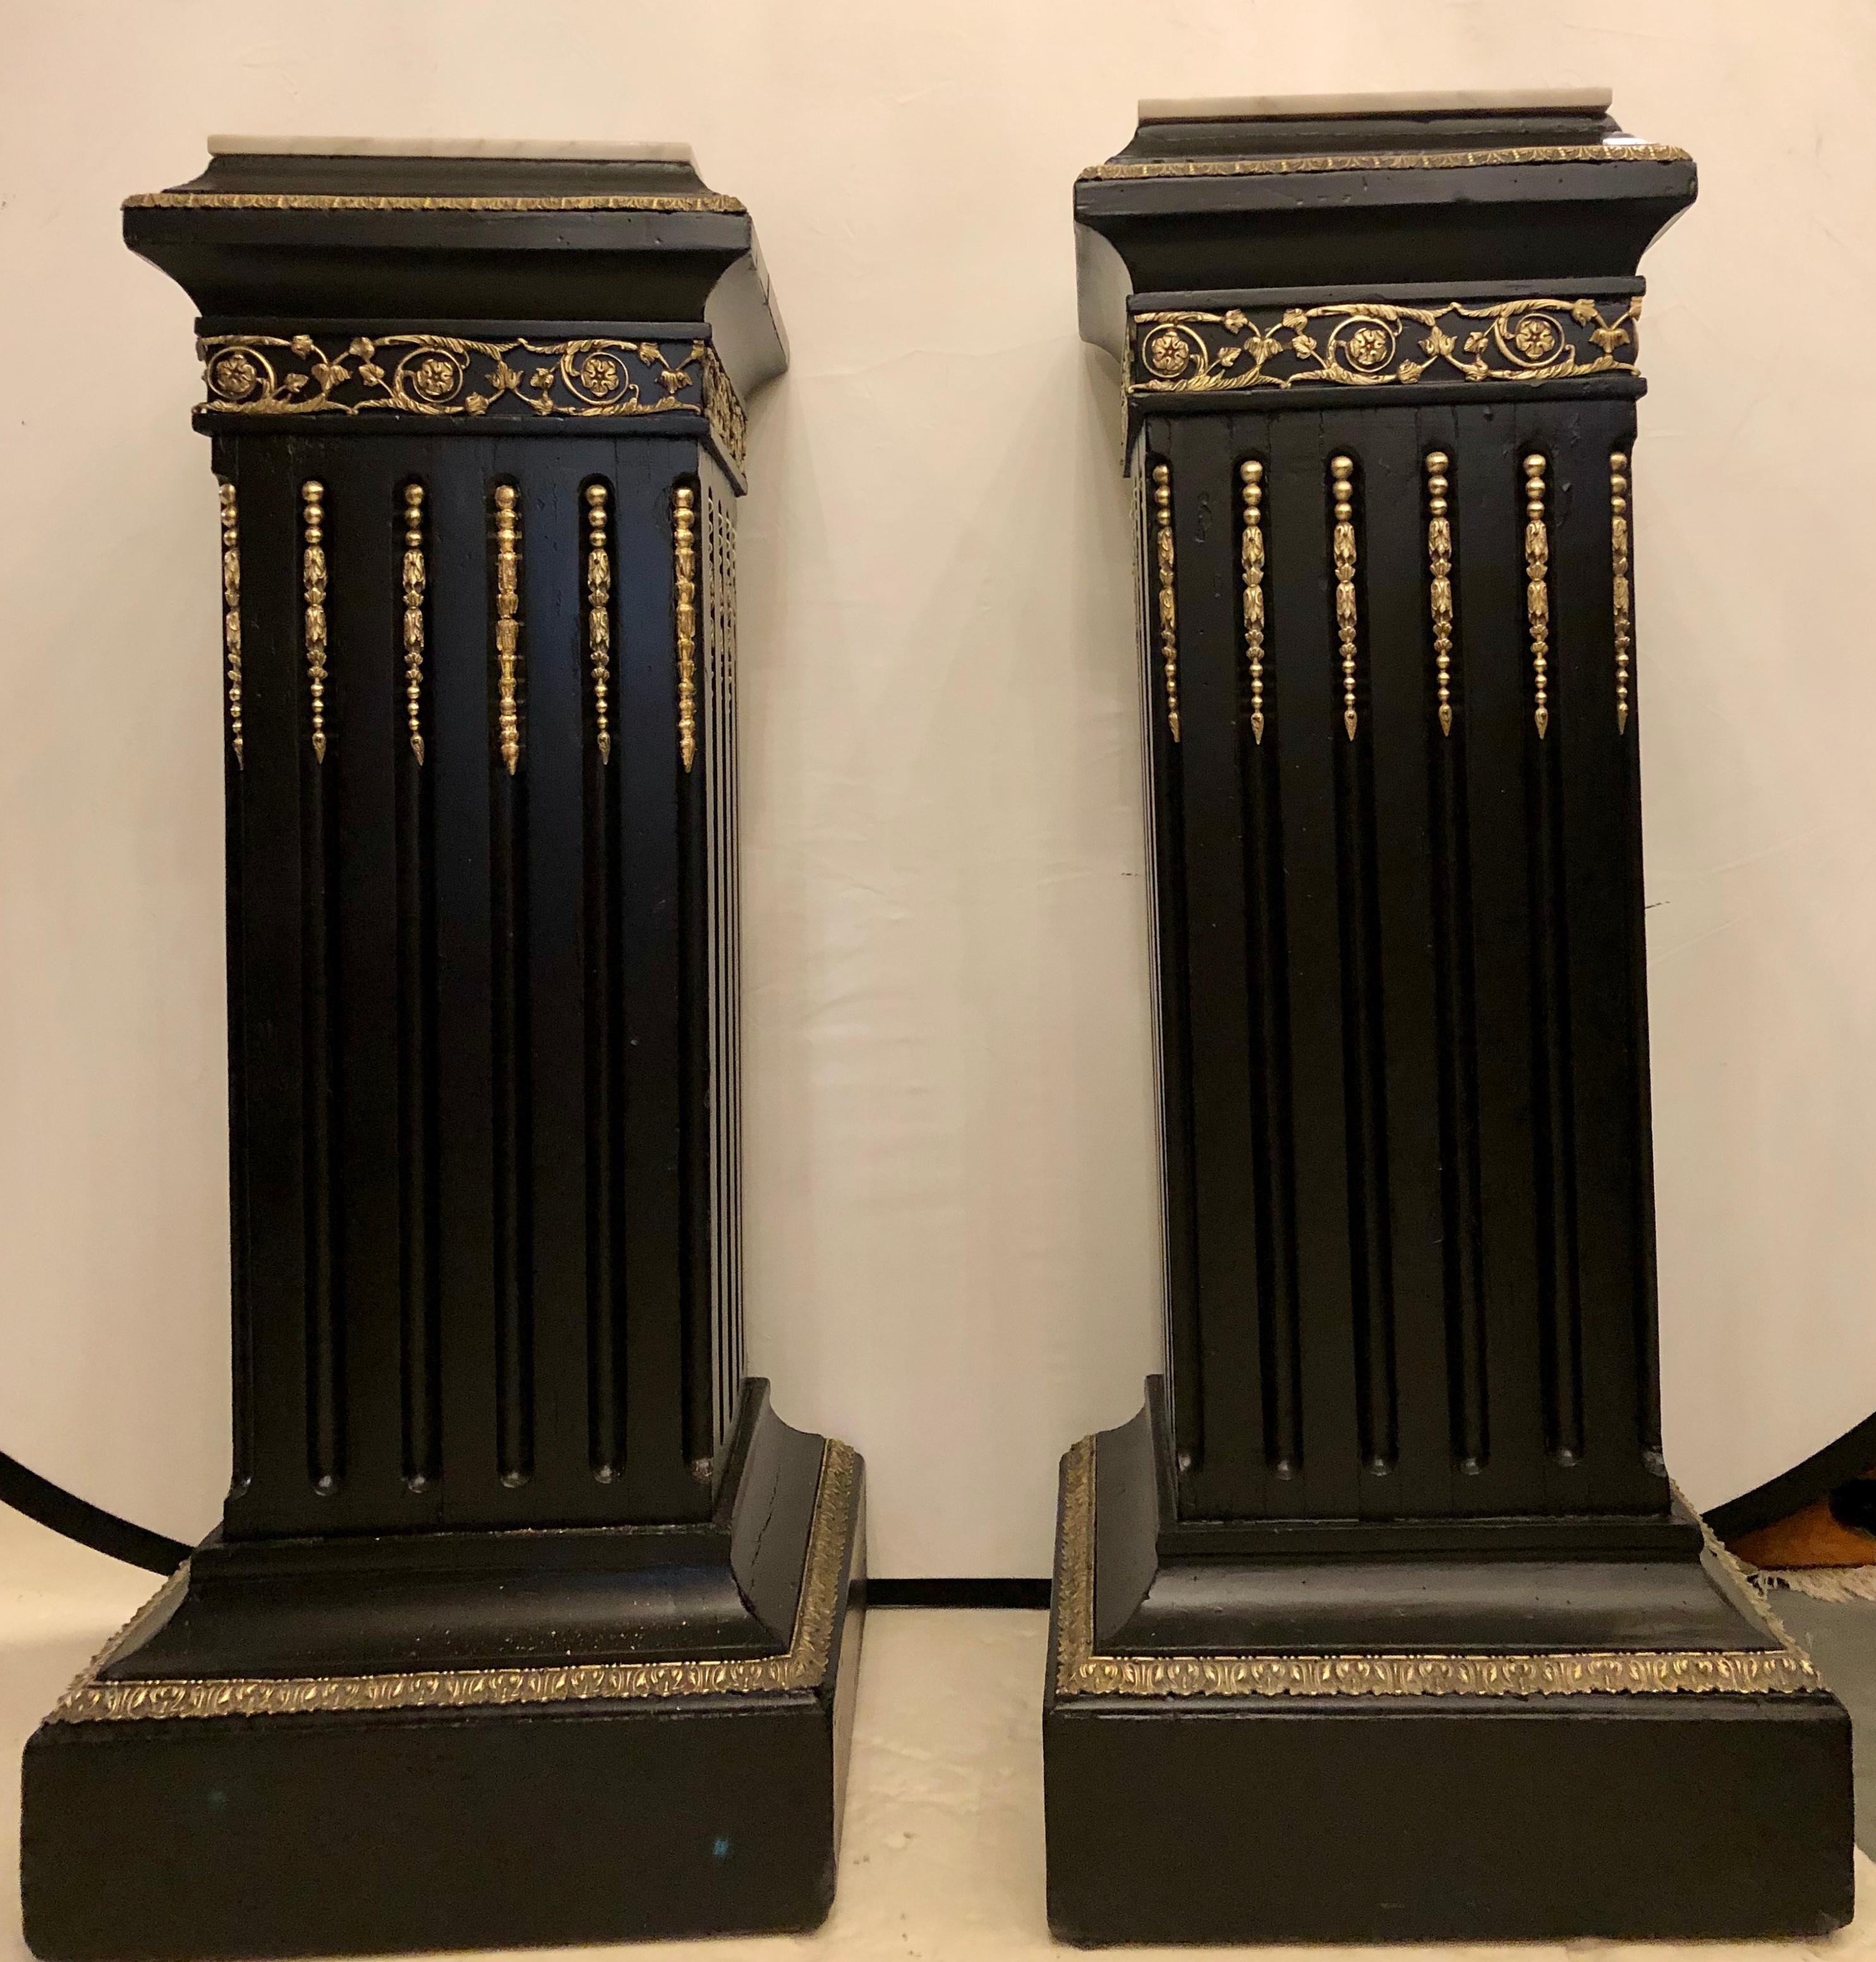 Pair of Hollywood Regency neoclassical ebony pedestals. Each having bronze mounts and white marble tops. This strong sturdy pair of column form stylized pedestals are certain to enhance any piece of art work or culture which sits upon them.
 